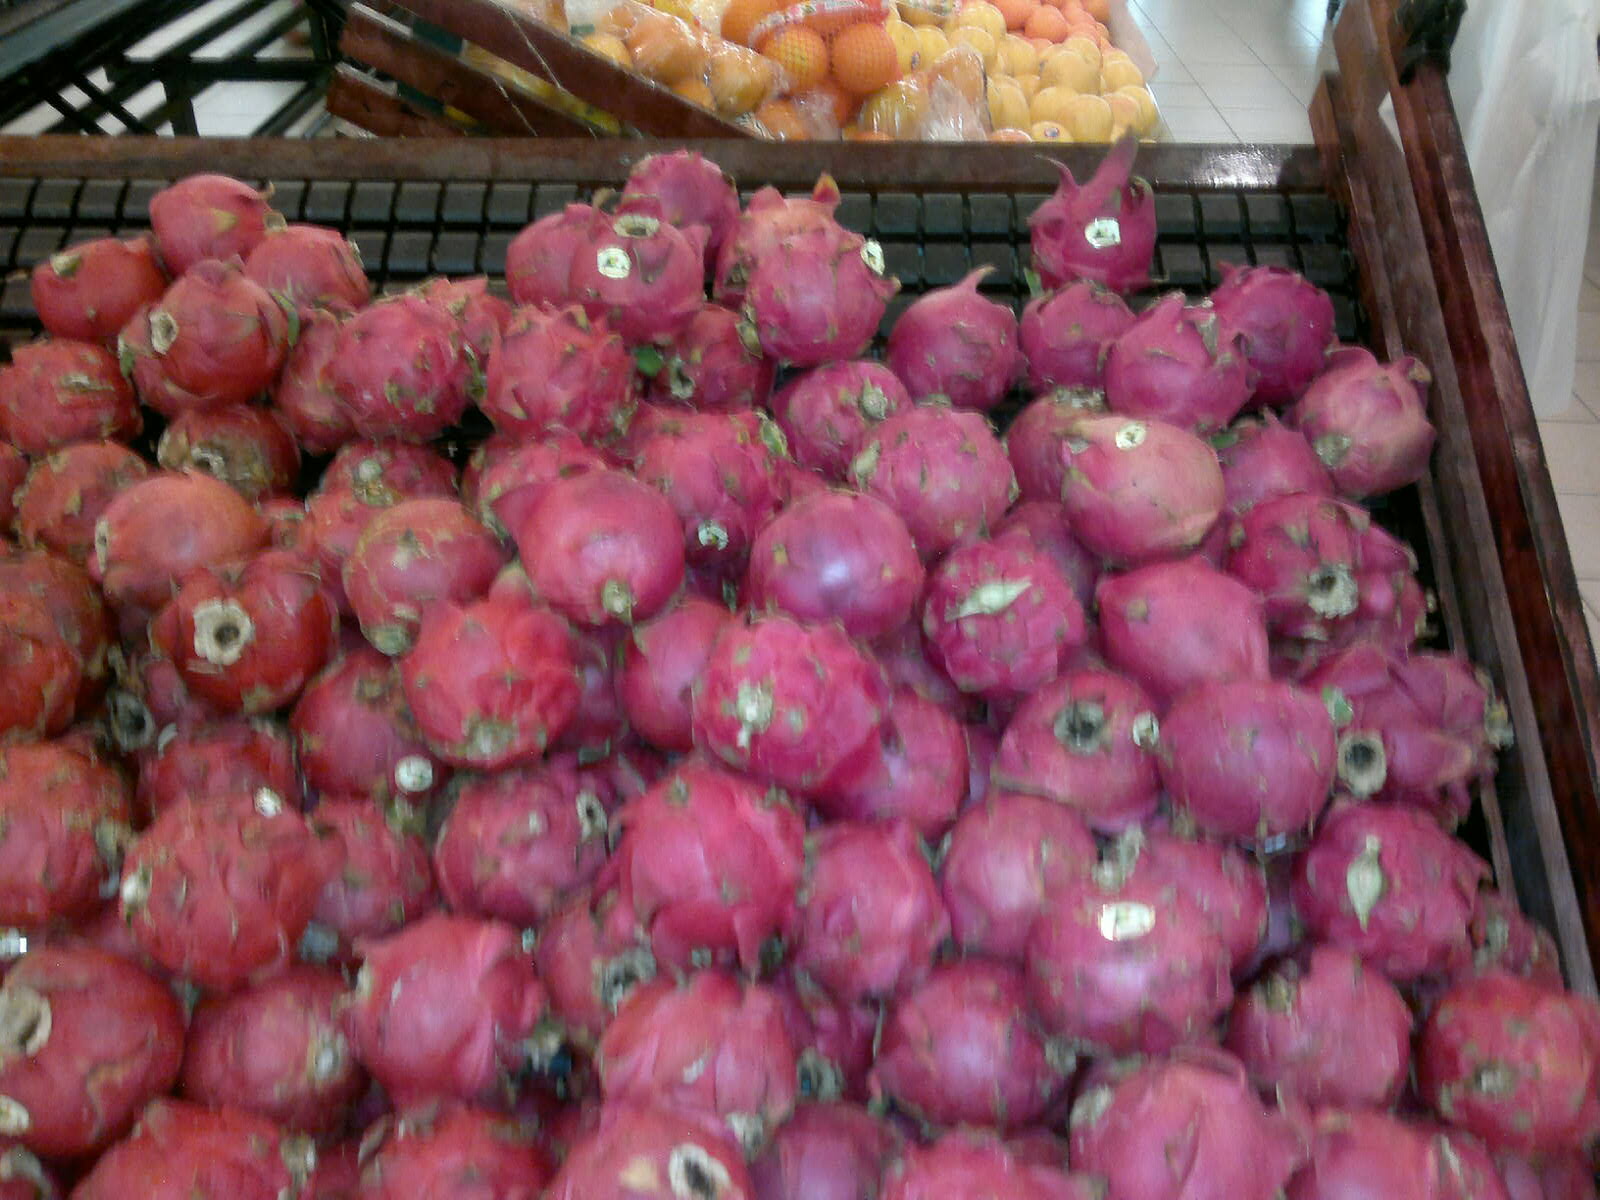 Dragon Fruits Galore: How To Buy Dragon Fruits in Supermarkets